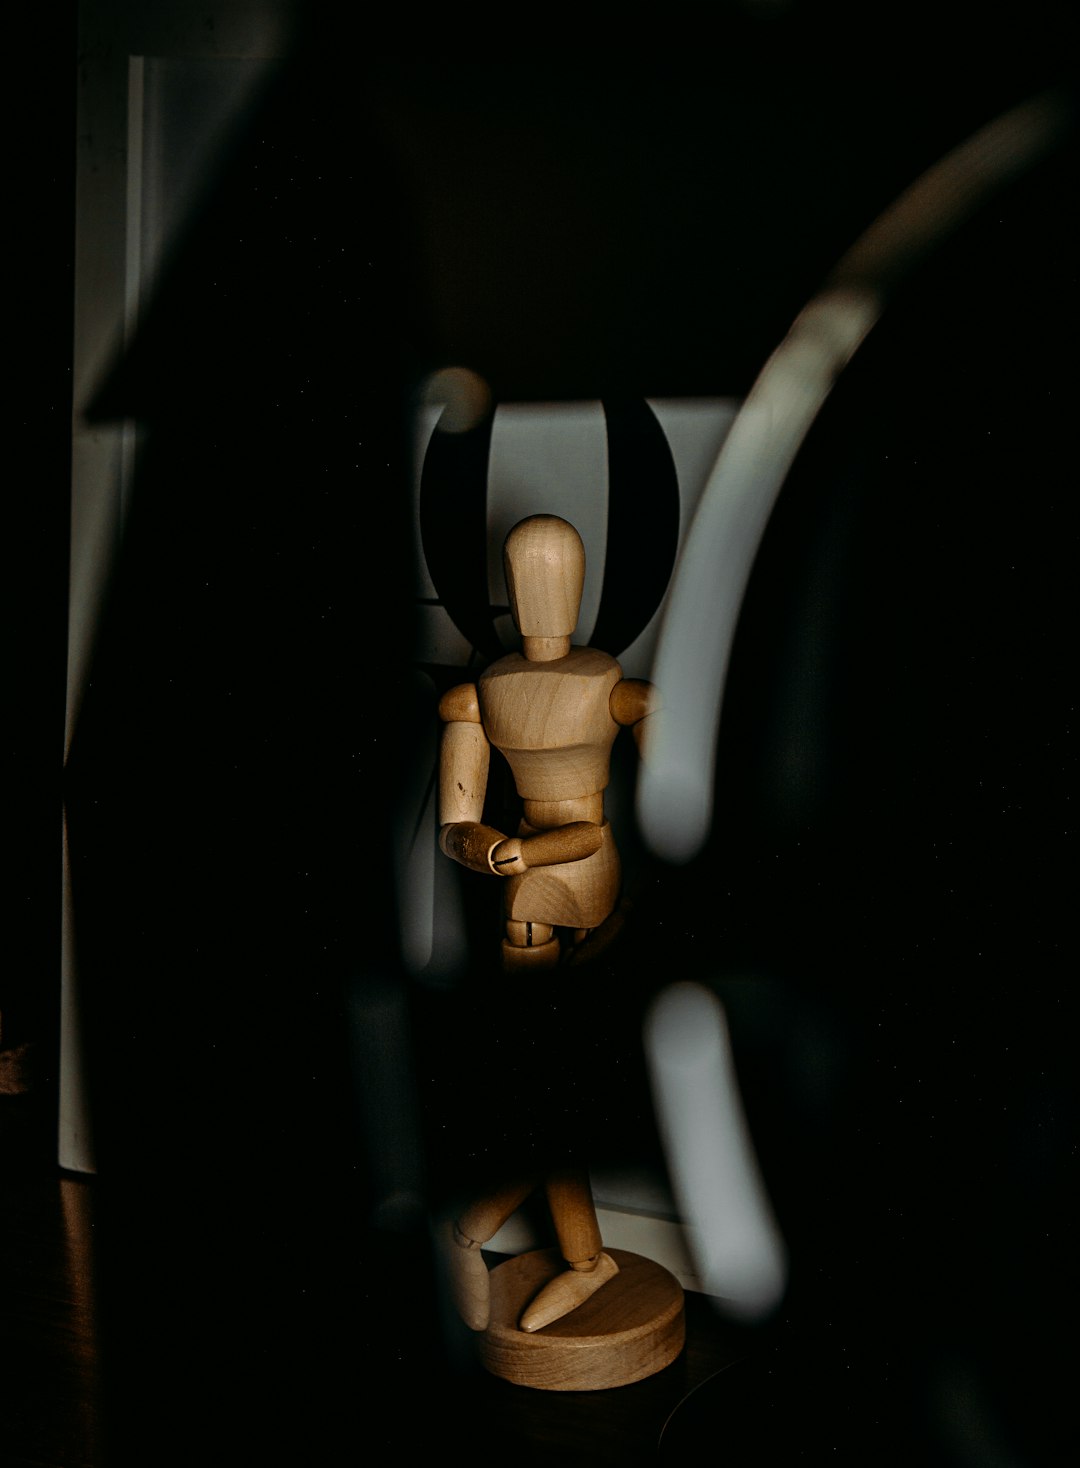 brown wooden human figure on black surface